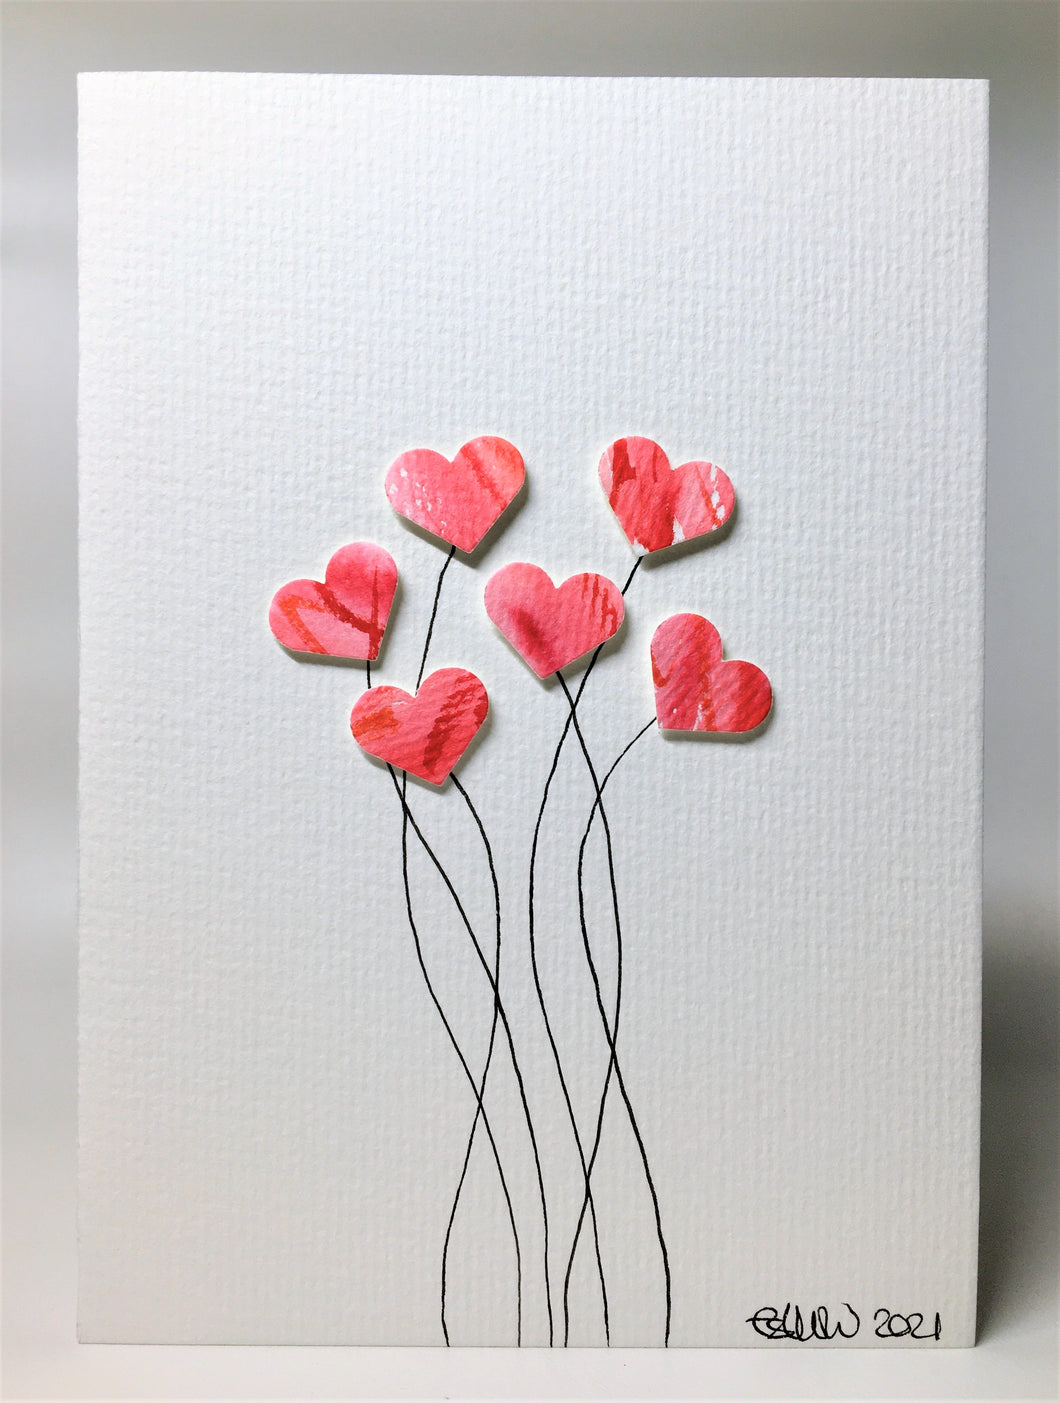 Original Hand Painted Greeting Card - Six Pink and Red Heart Flowers - eDgE dEsiGn London